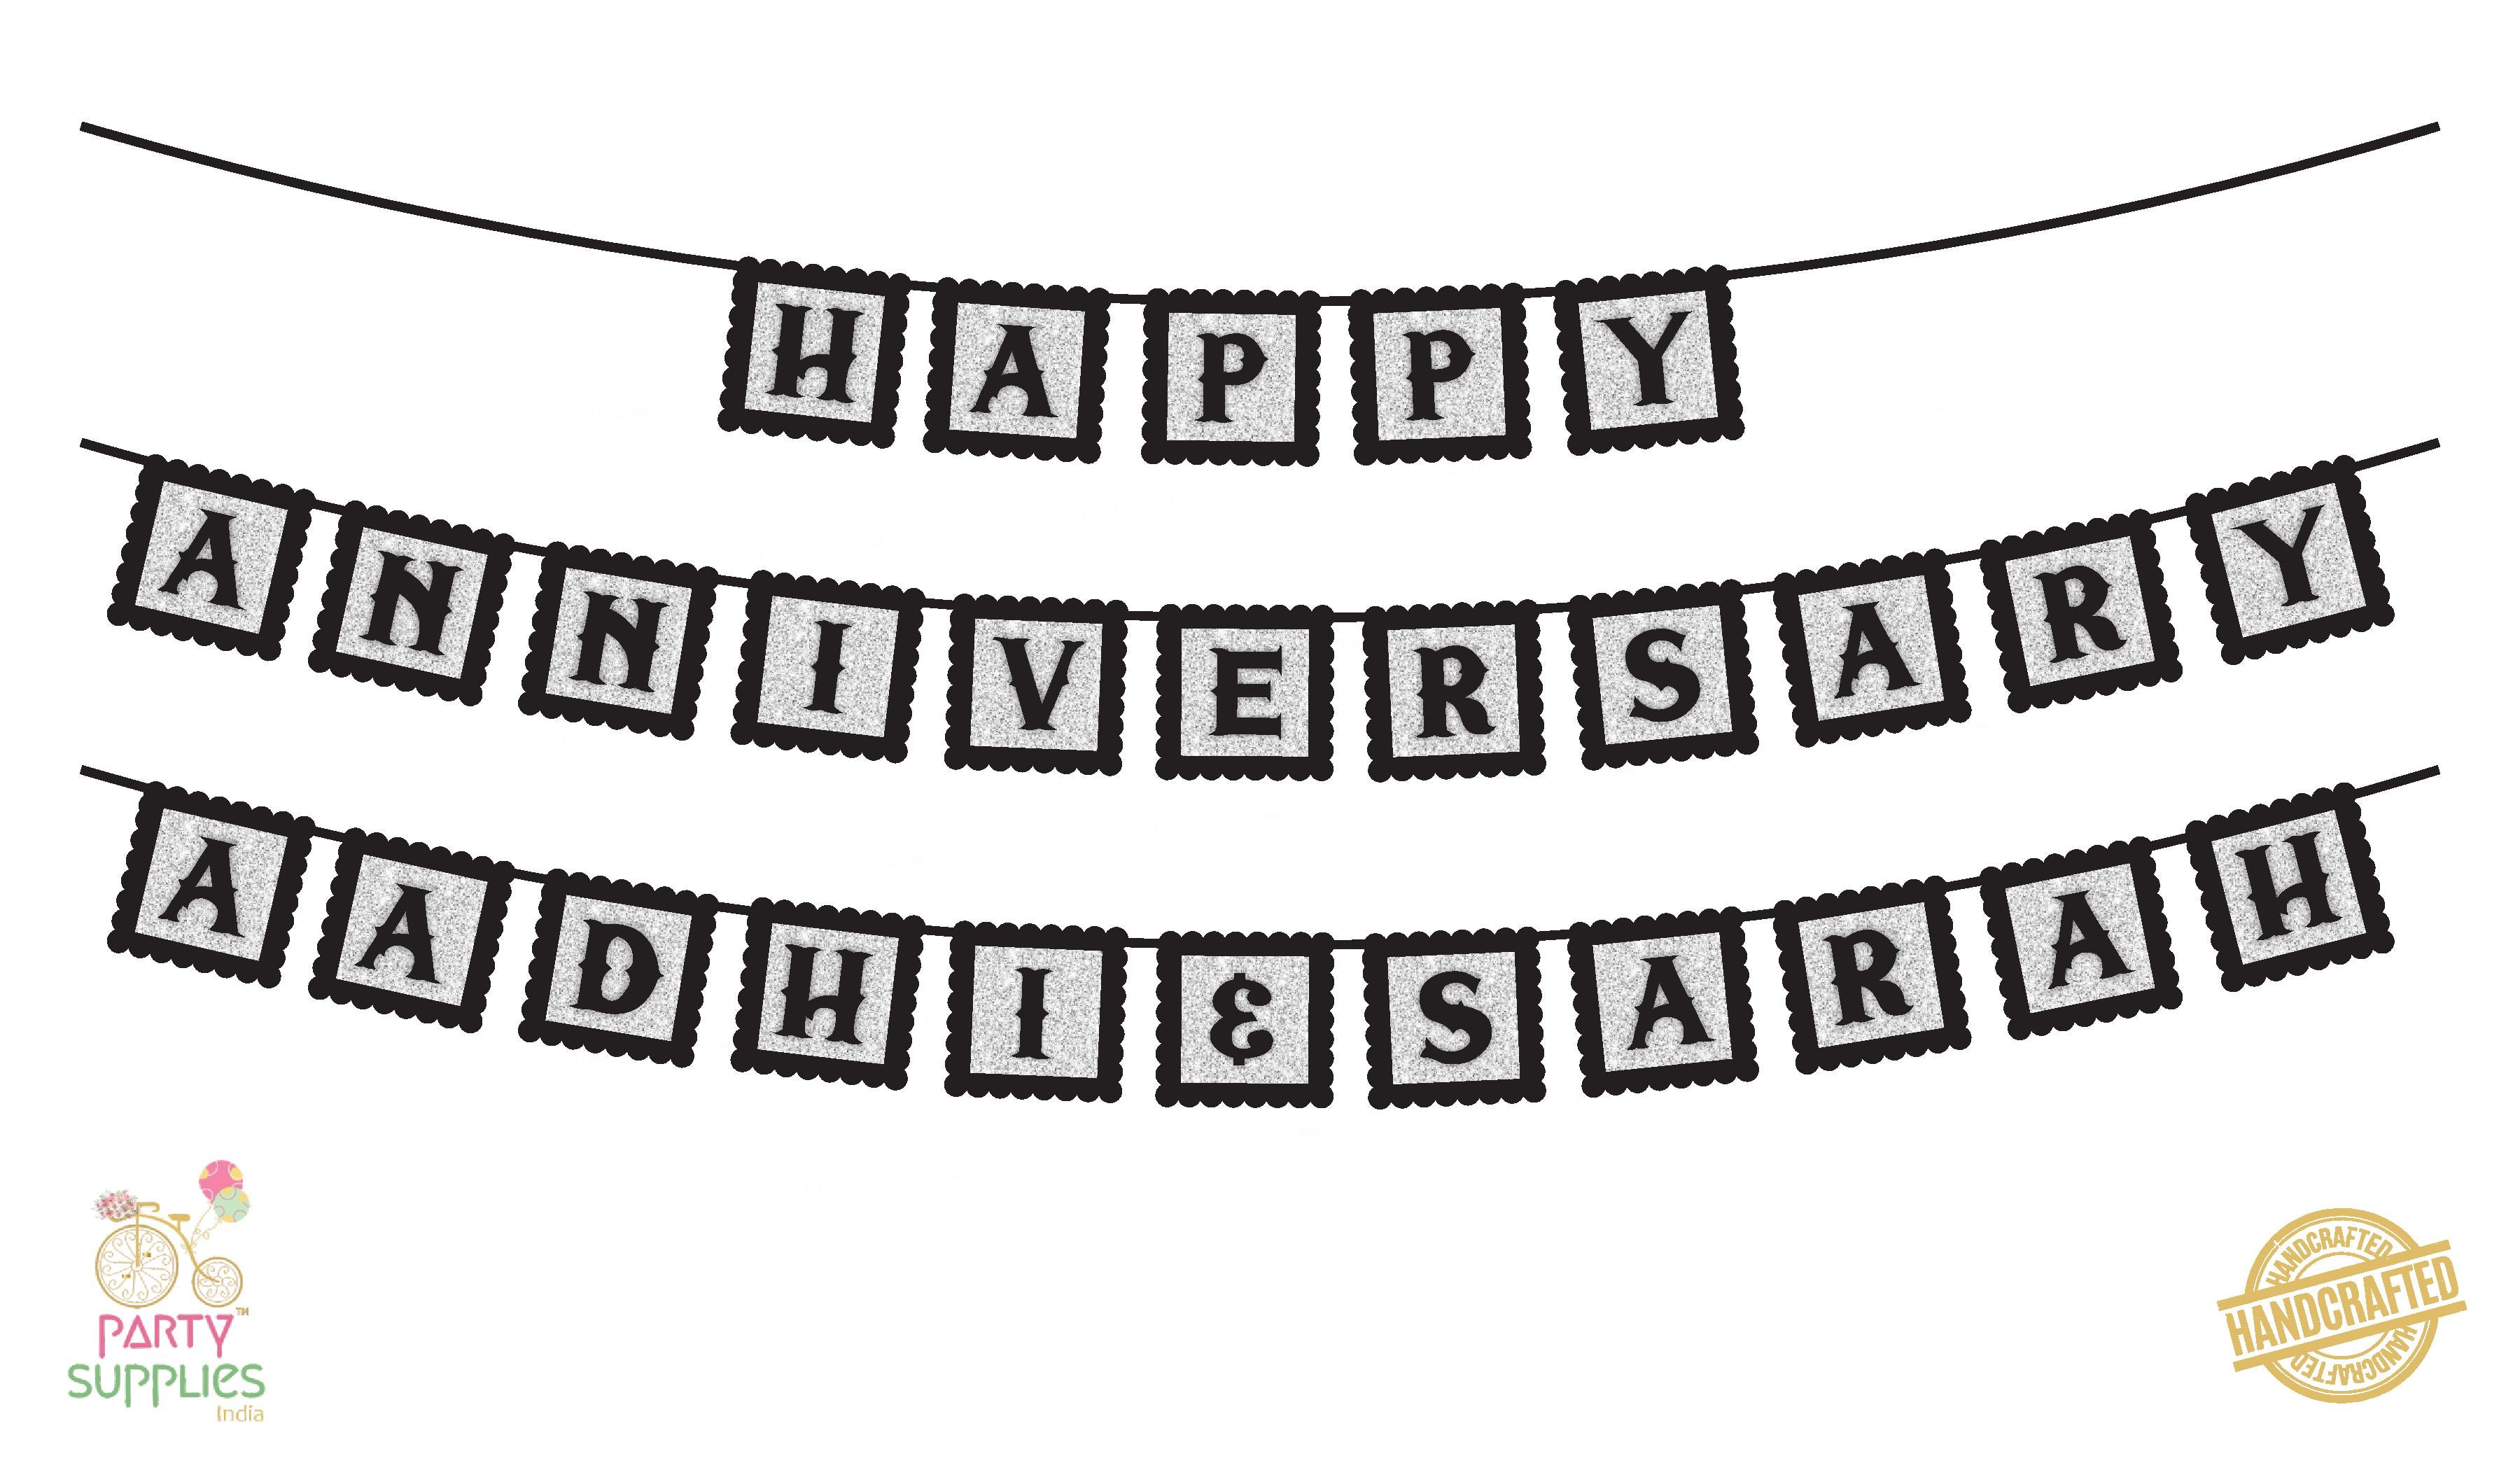 Hand Crafted Silver with Black Happy Anniversary Bunting